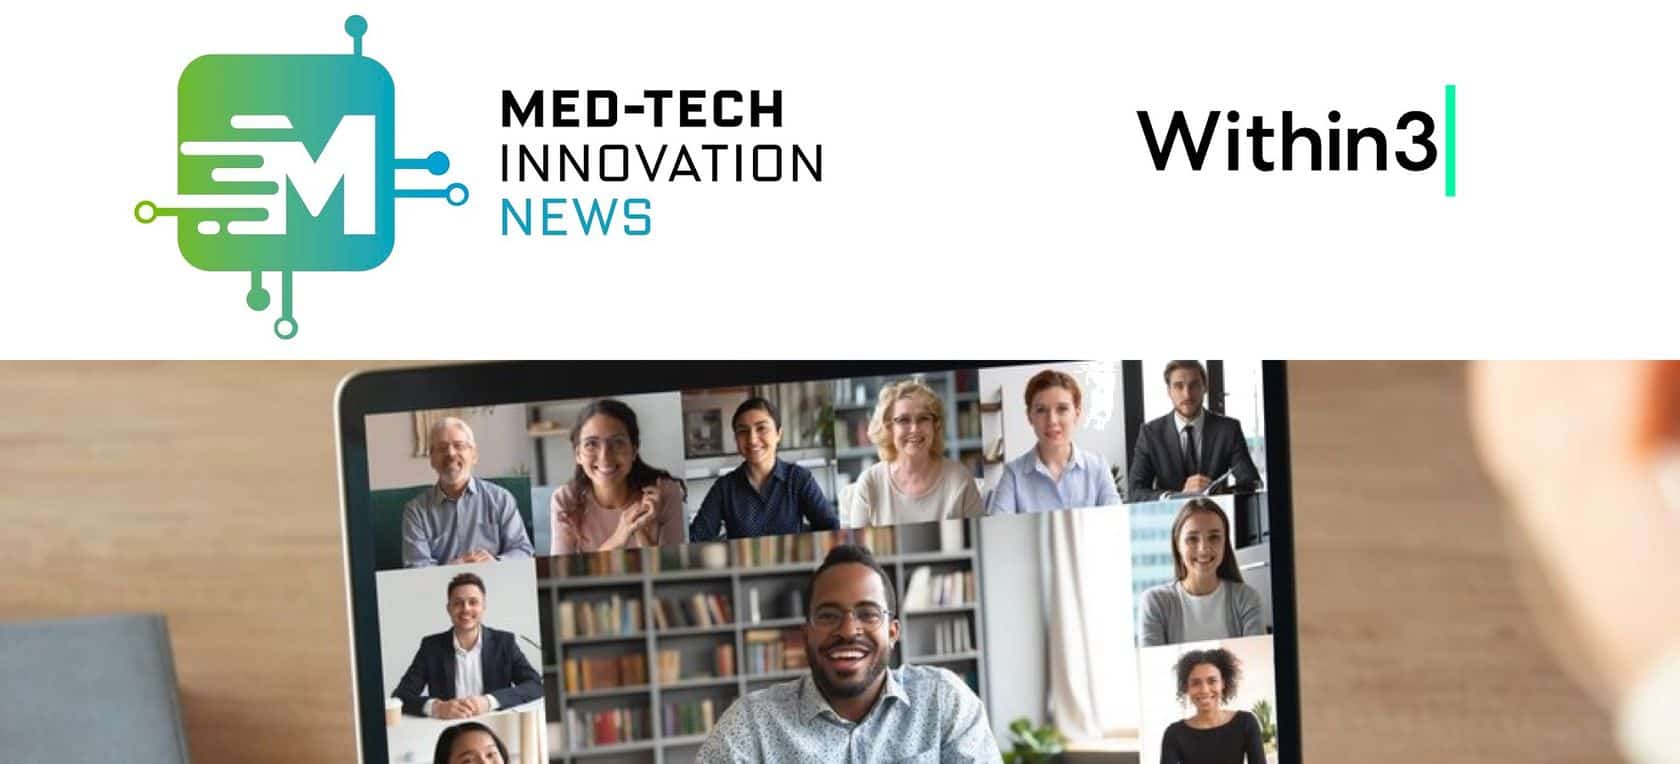 Medtech News on WFH, digital engagement, and remote trials with Within3